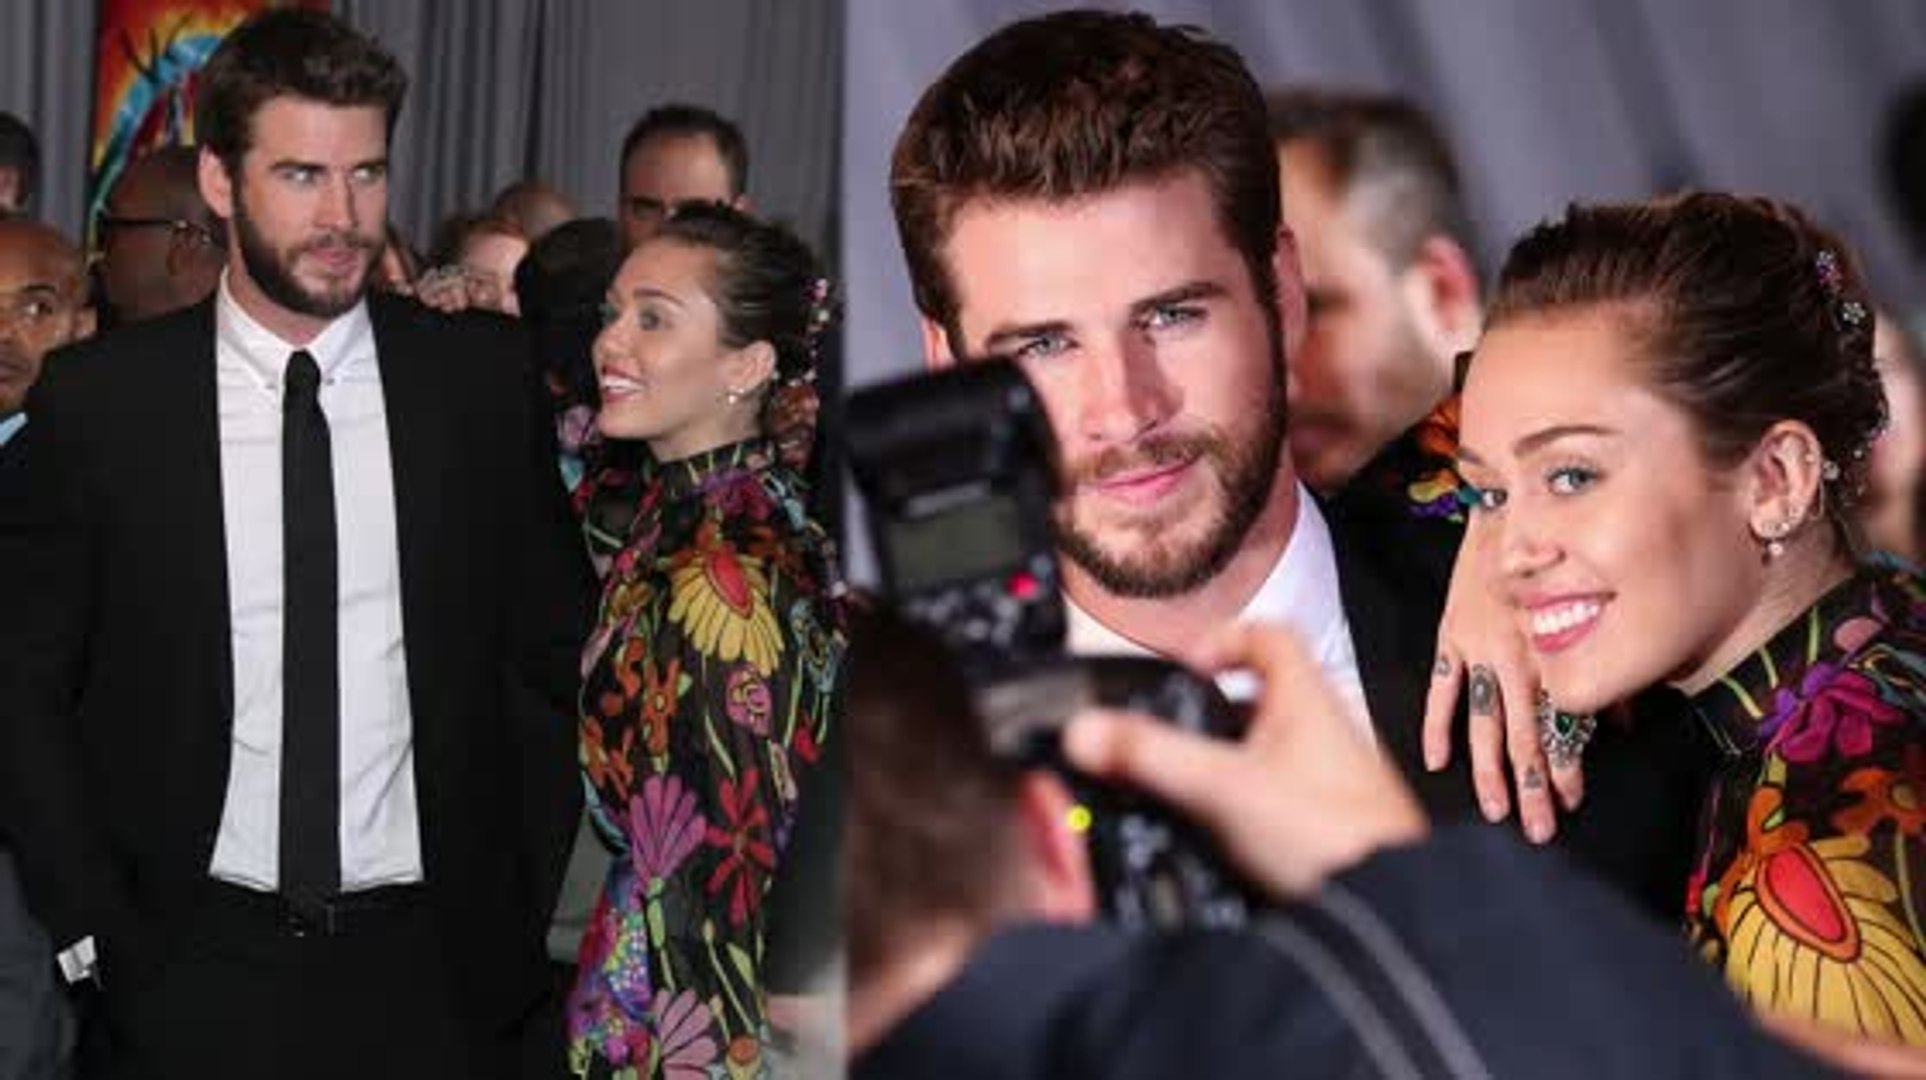 Miley Cyrus and Liam Hemsworth Dazzle on Red Carpet